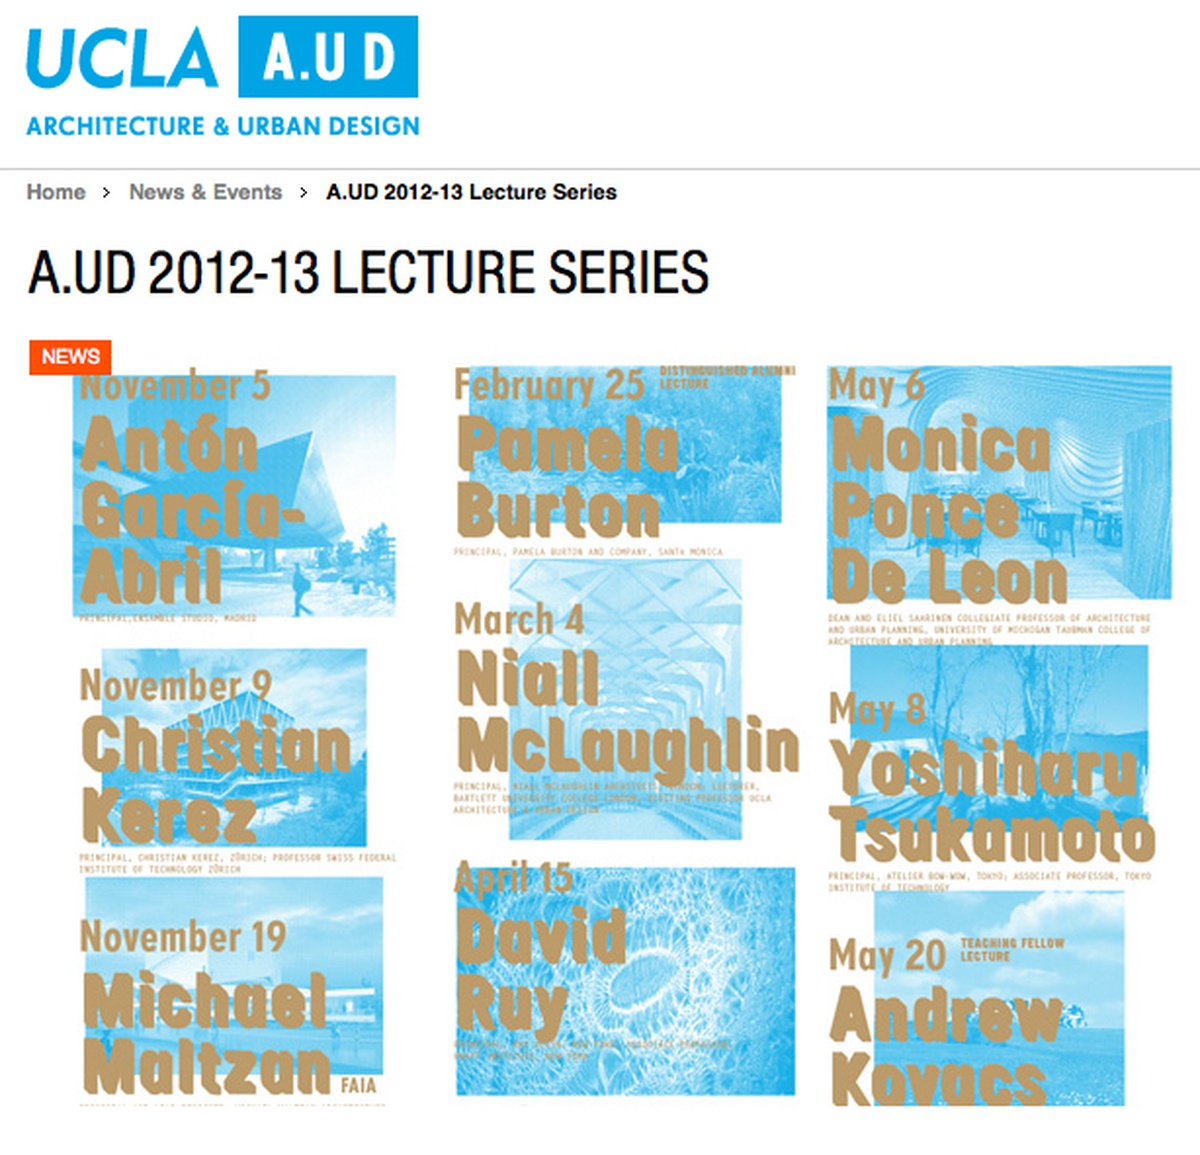 International Lecture Series at UCLA